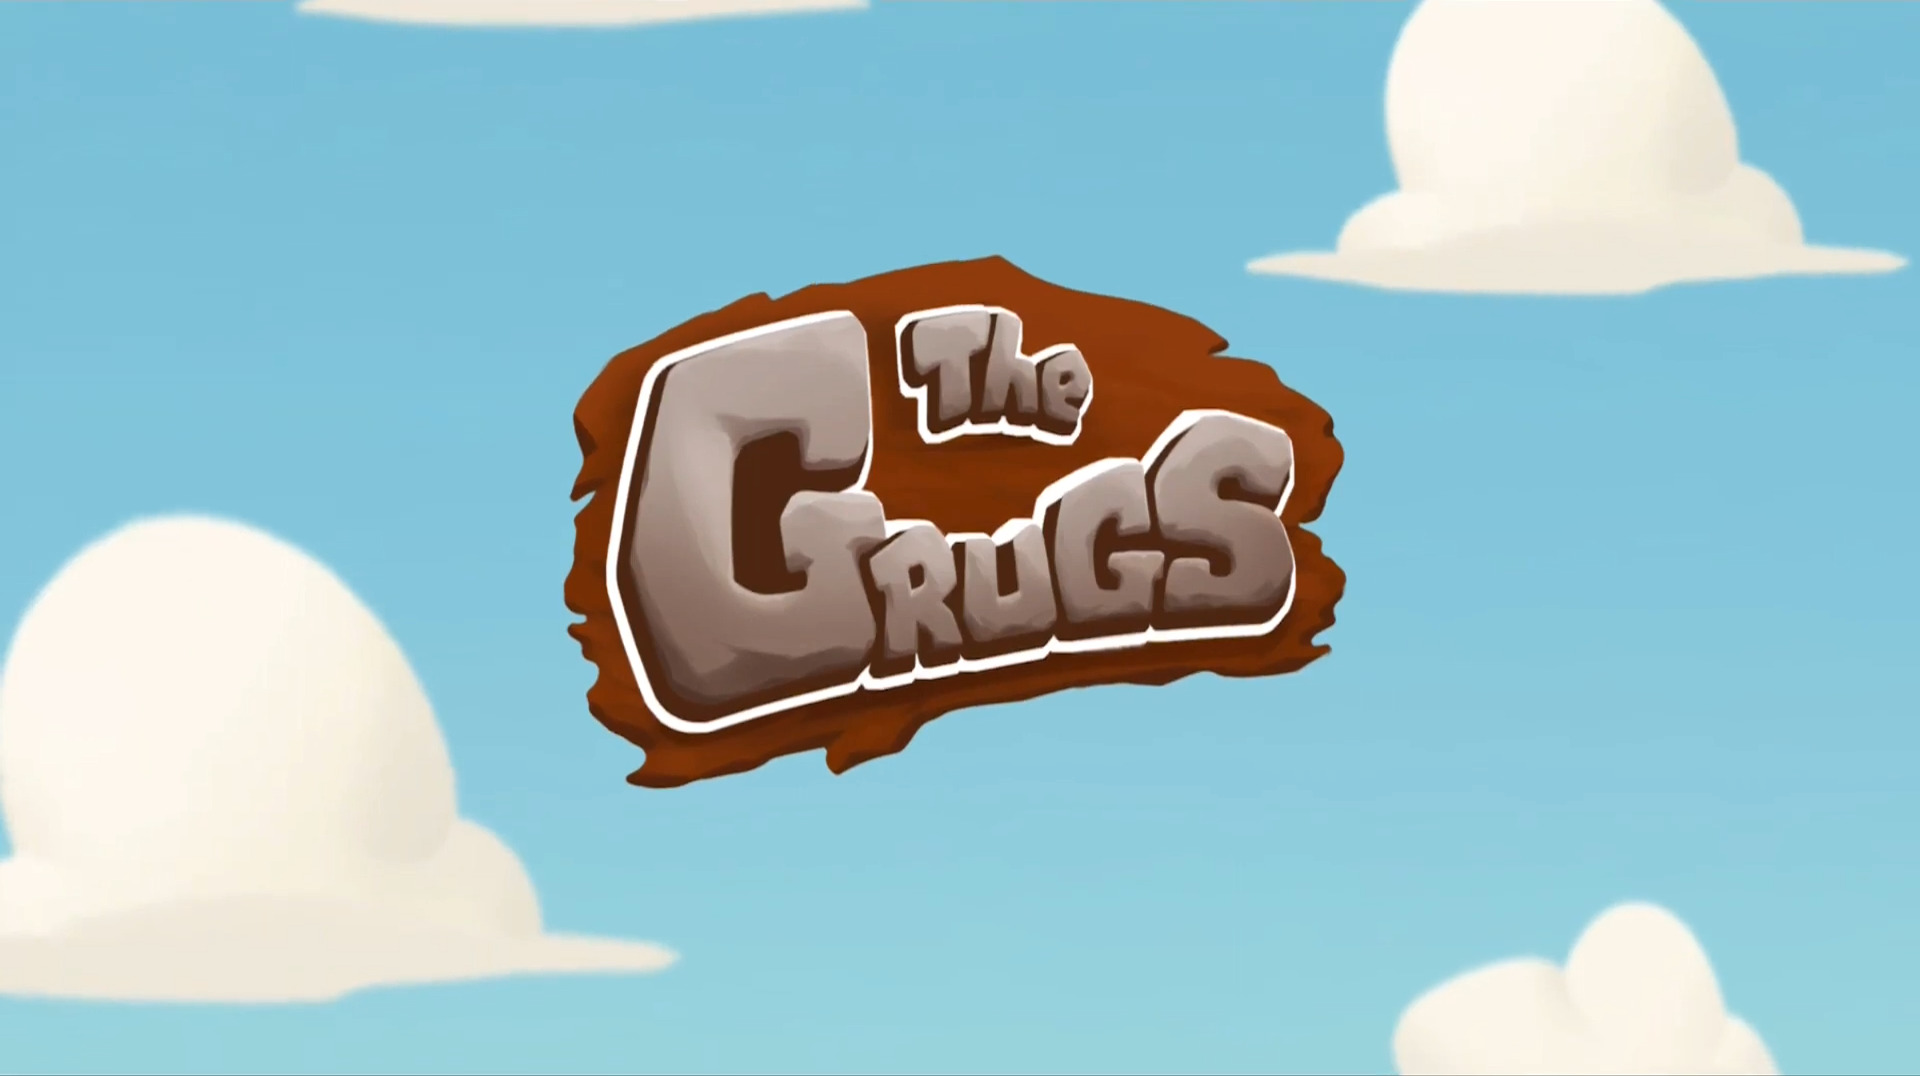 Full version of Android apk The Grugs: Hector's rest quest for tablet and phone.